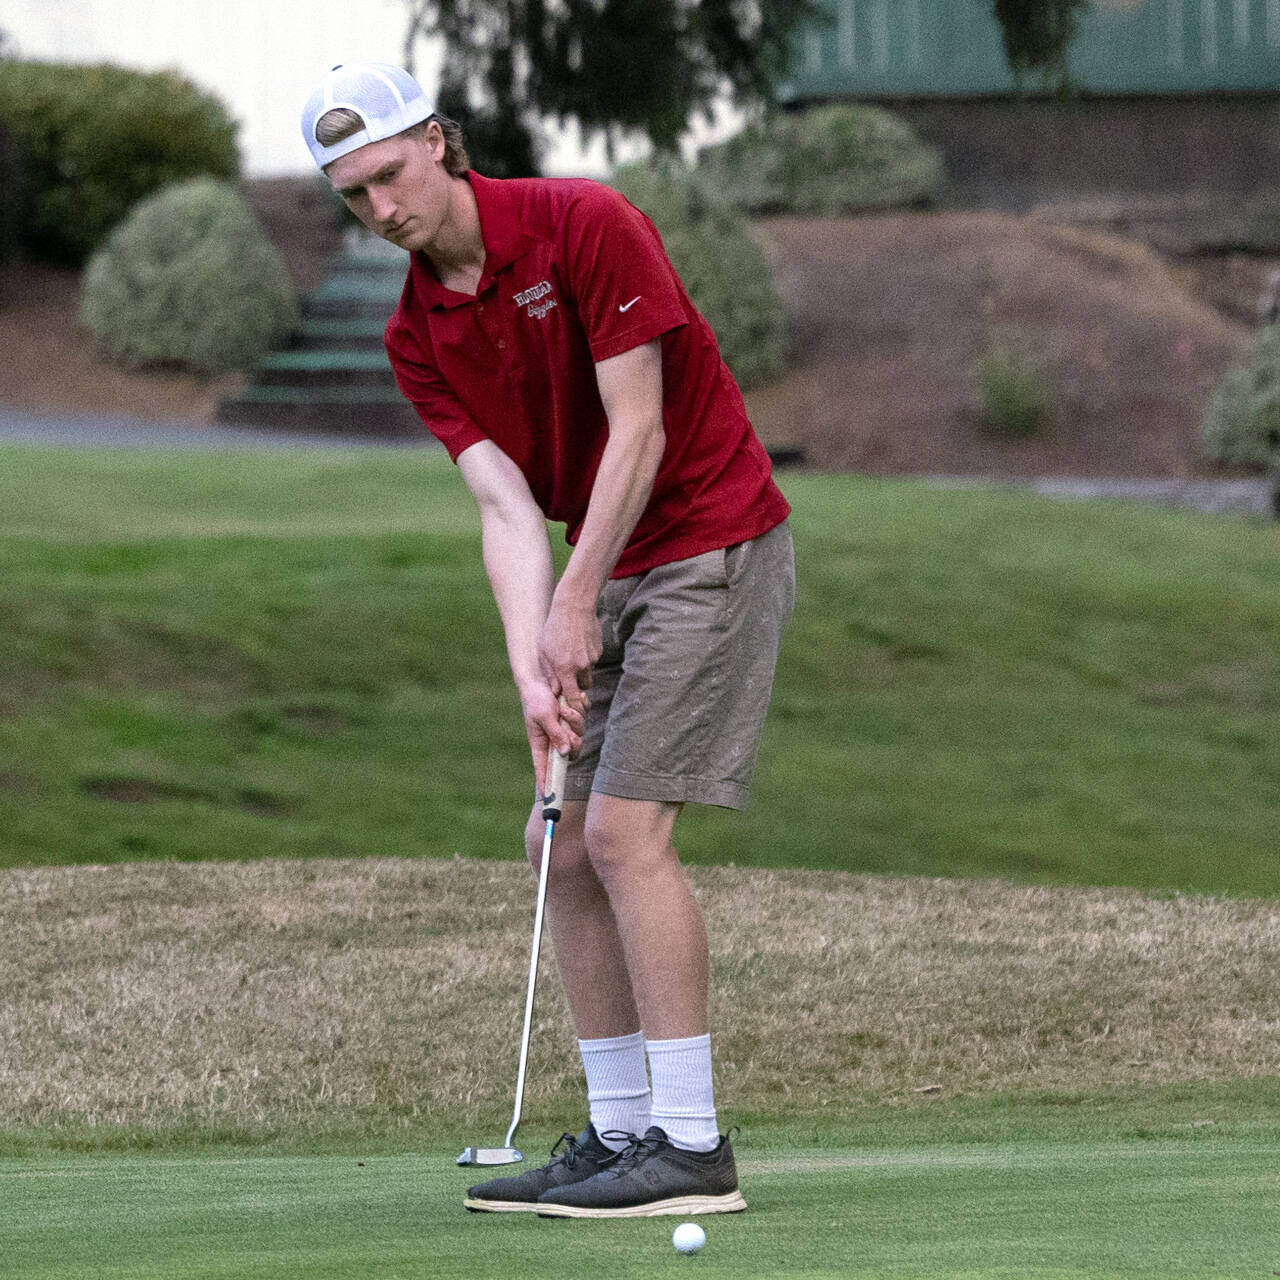 PHOTO BY PATTI REYNVAAN Hoquiam’s Mick Bozich, seen here in a file photo, qualified for state after placing fourth overall in the 1A District 4 Championships on Monday and Tuesday in Tumwater.